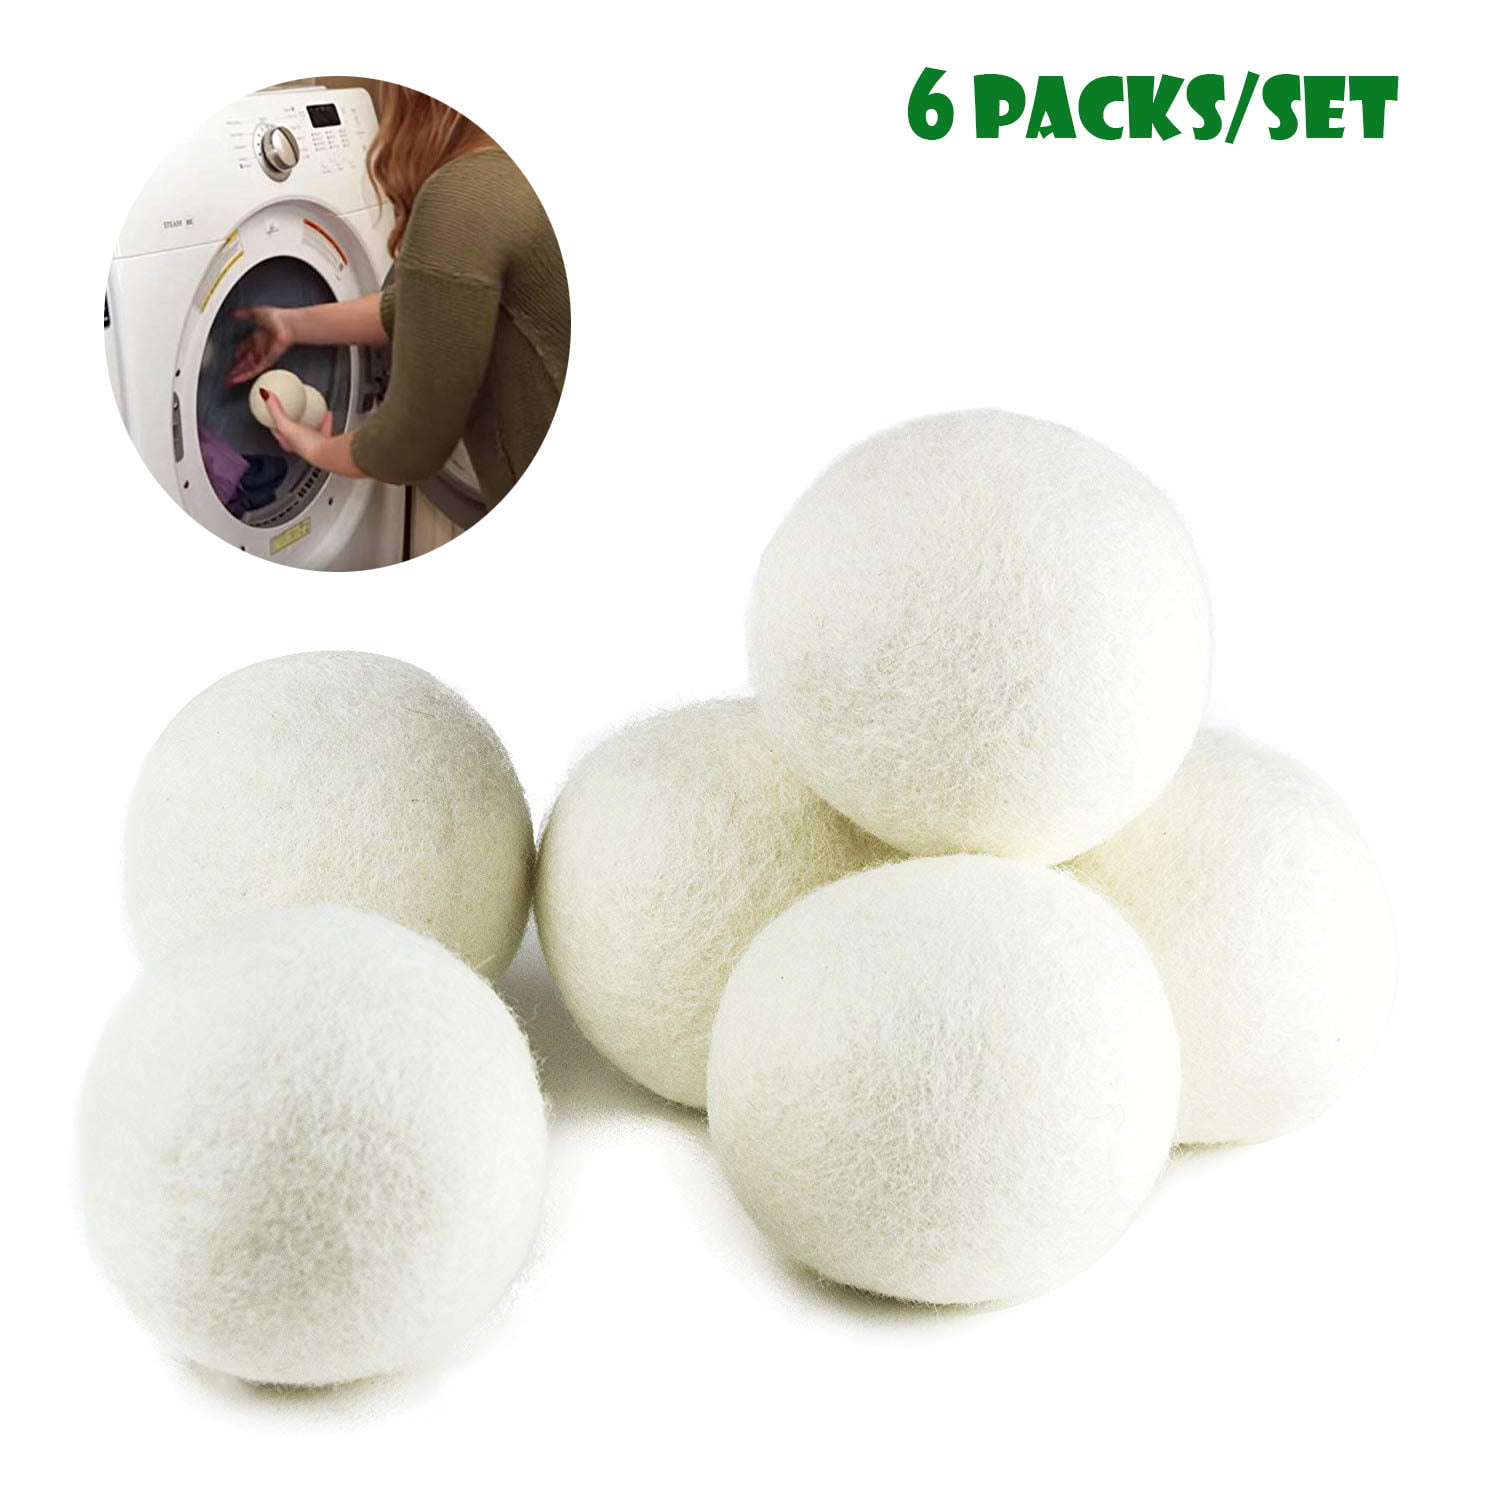 Details about   Drying Ball Fabric Softeners Strong Structure Laundry Balls Softener Oval Shaped 